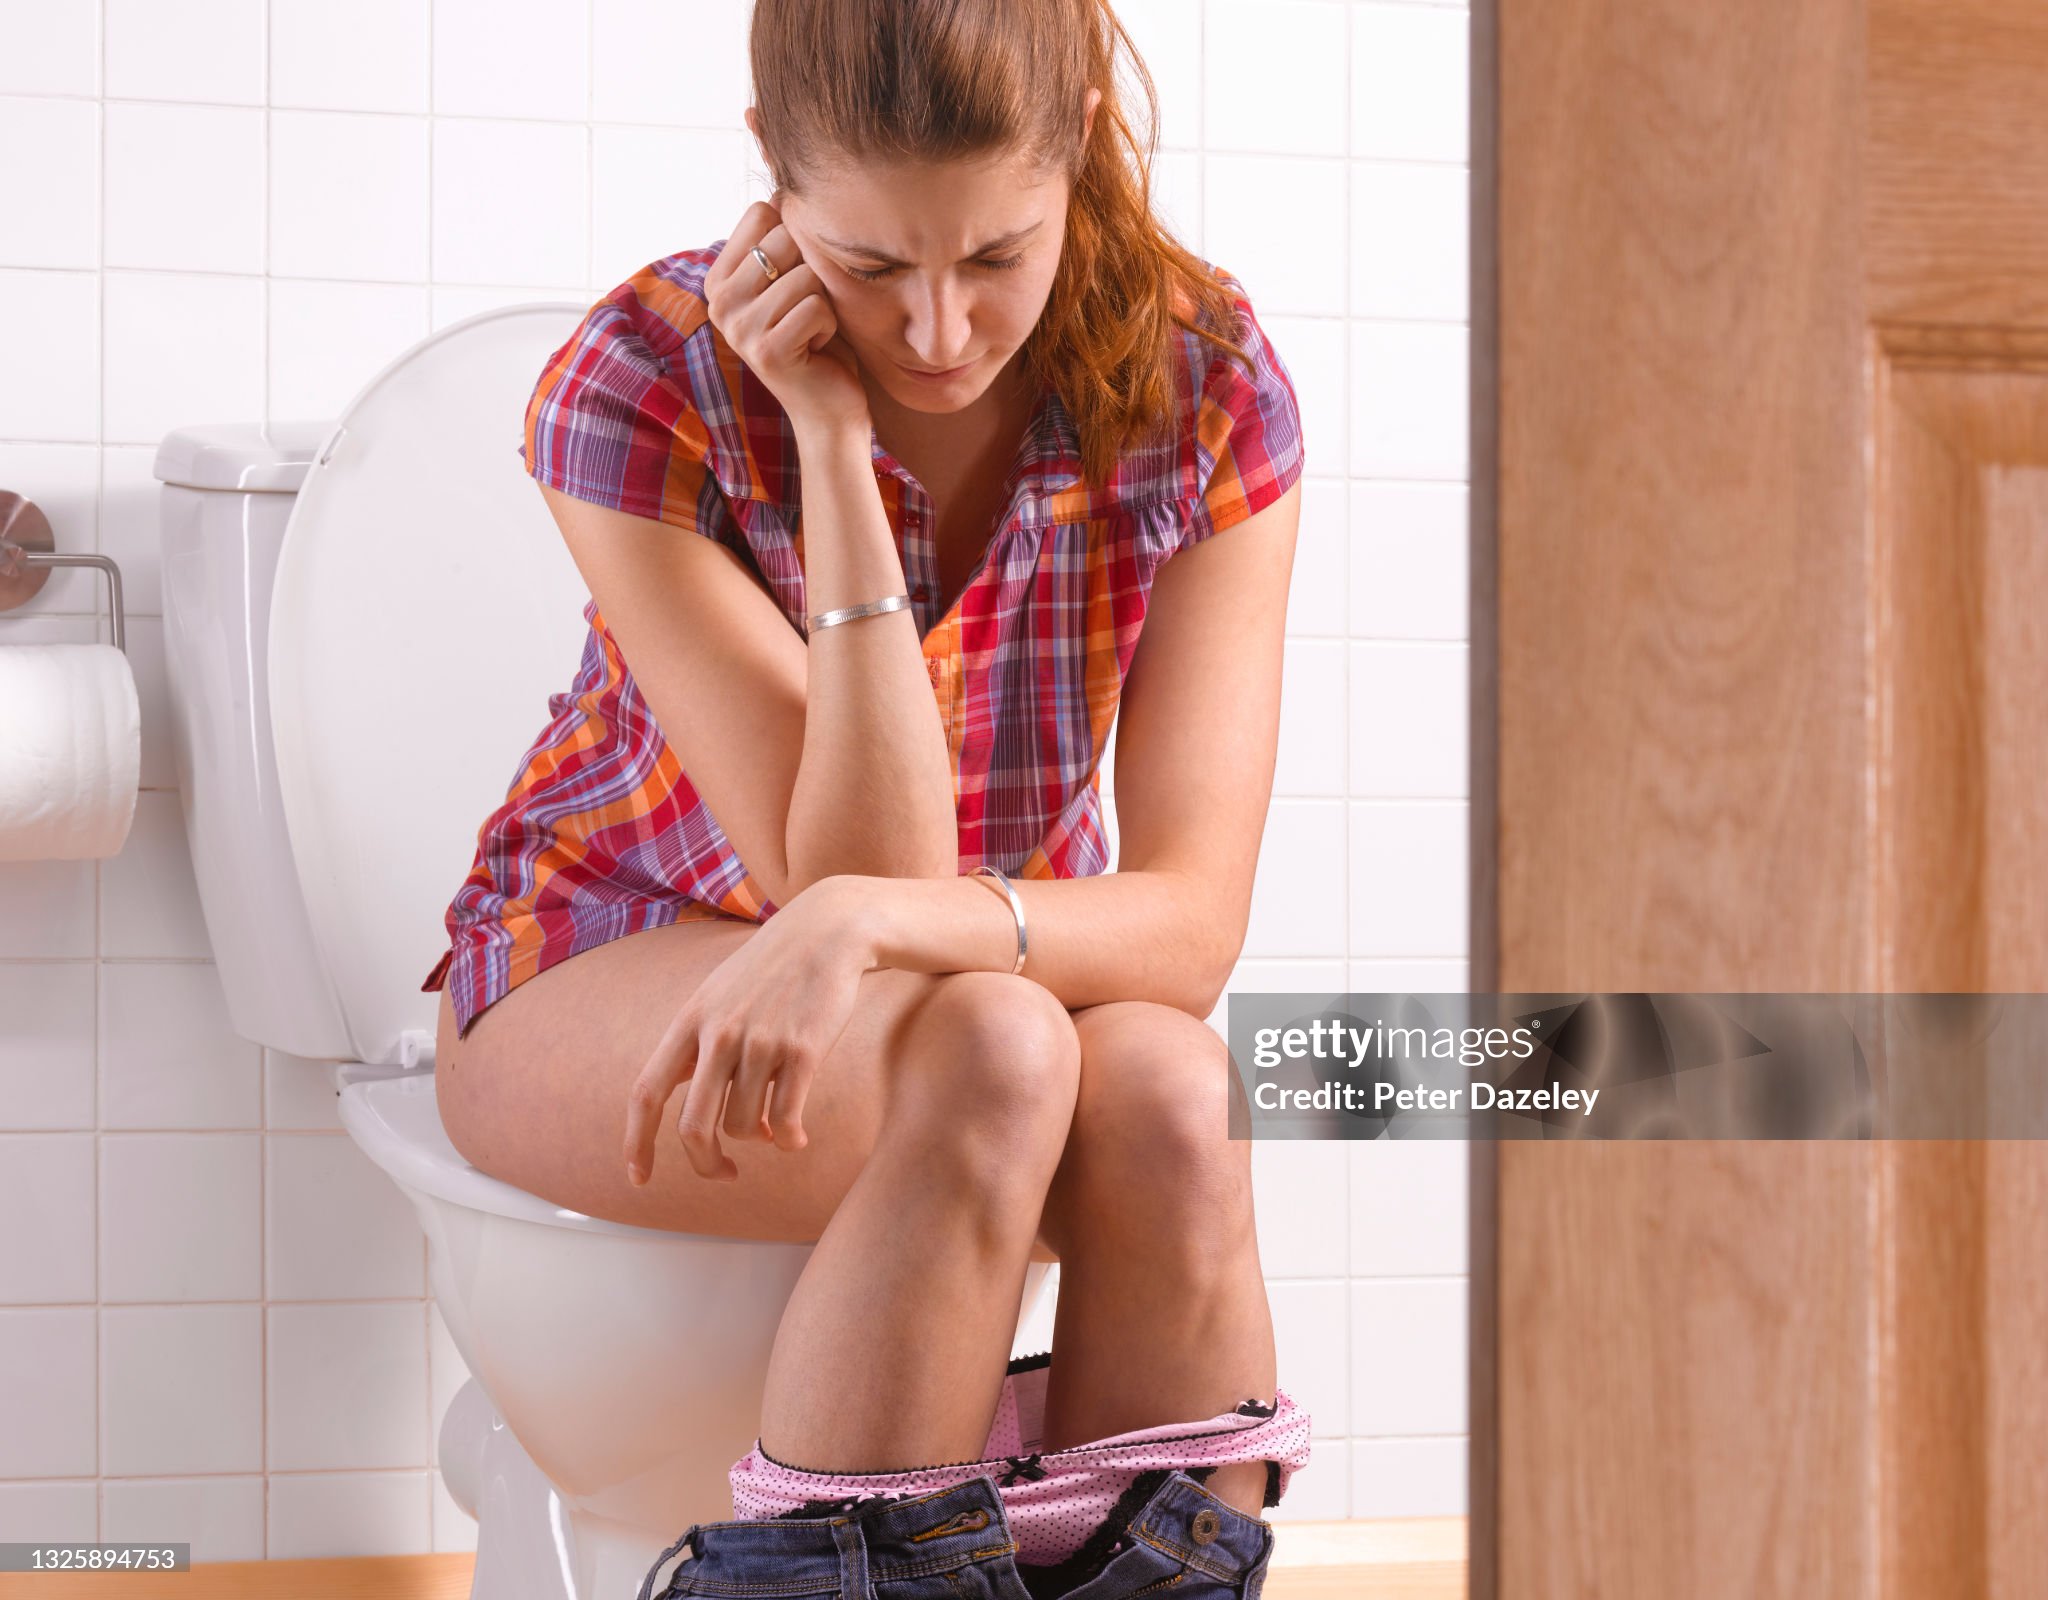 woman-in-pain-sitting-on-the-toilet.jpg